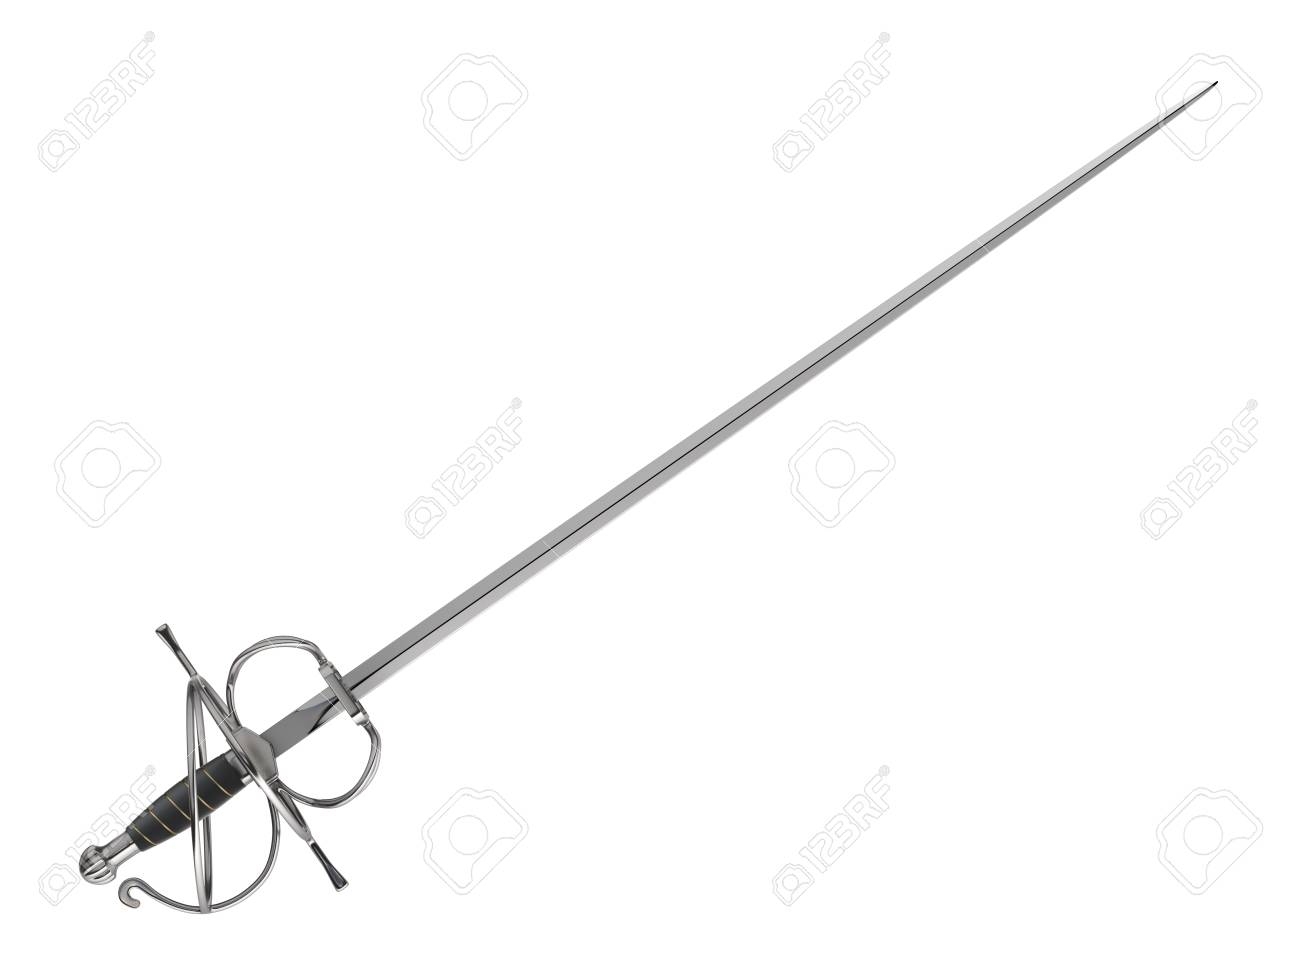 Medieval Fencing Sword Isolated On White Background 3d